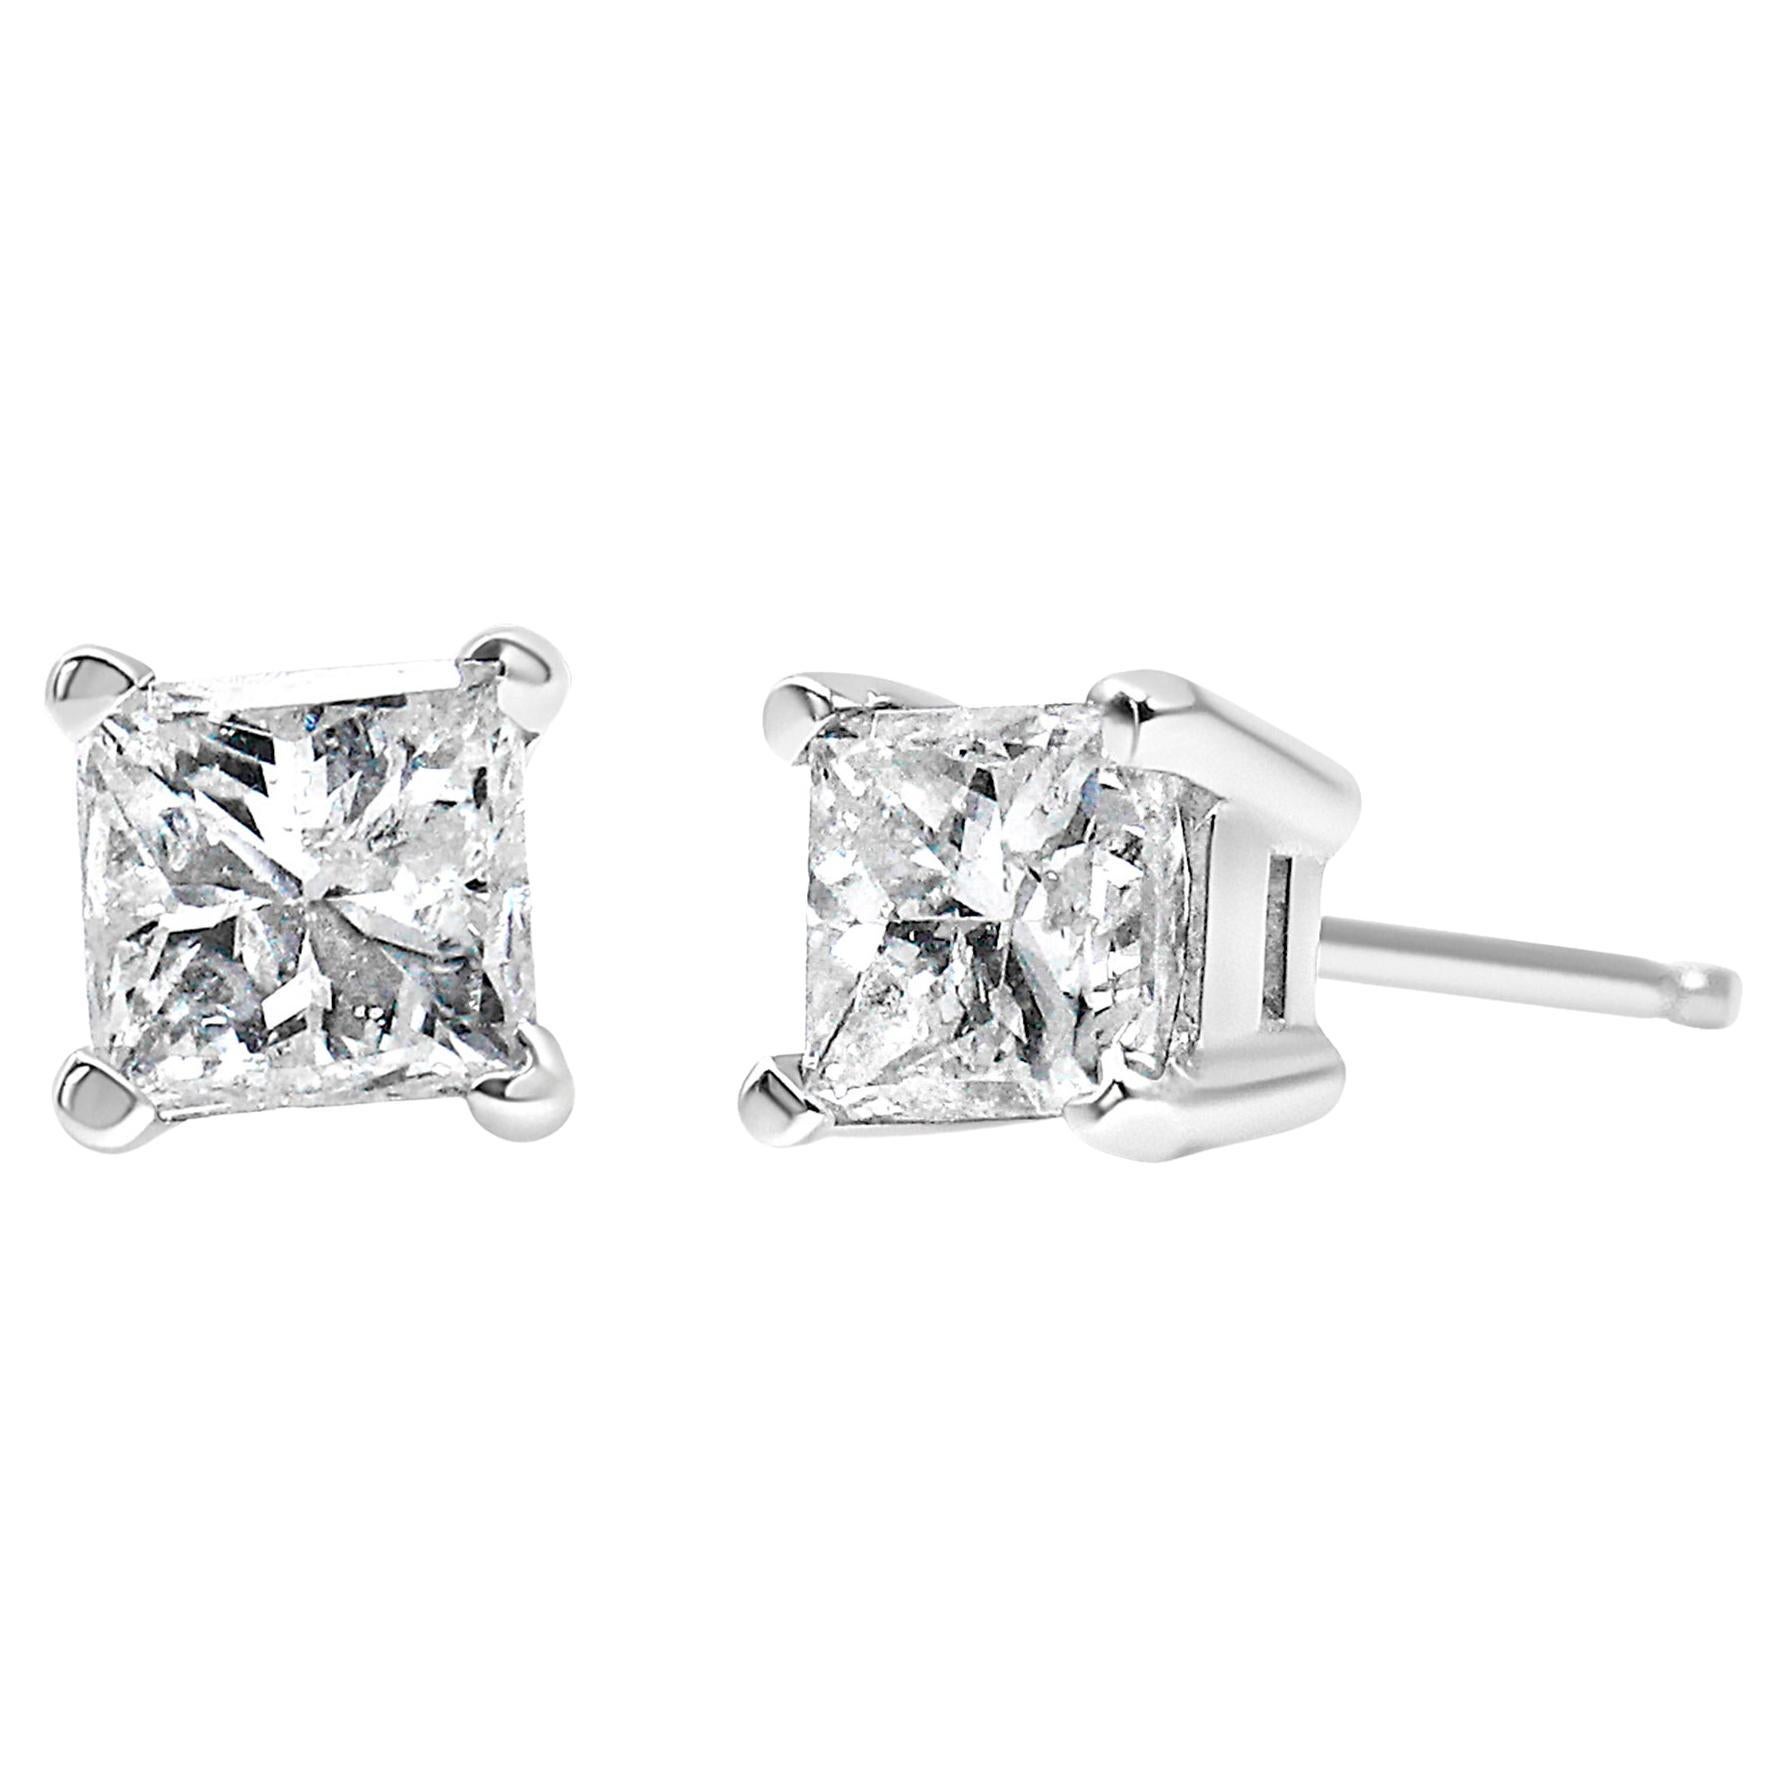 14K White Gold 1/3 Carat Square Near Colorless Diamond Solitaire Stud Earrings